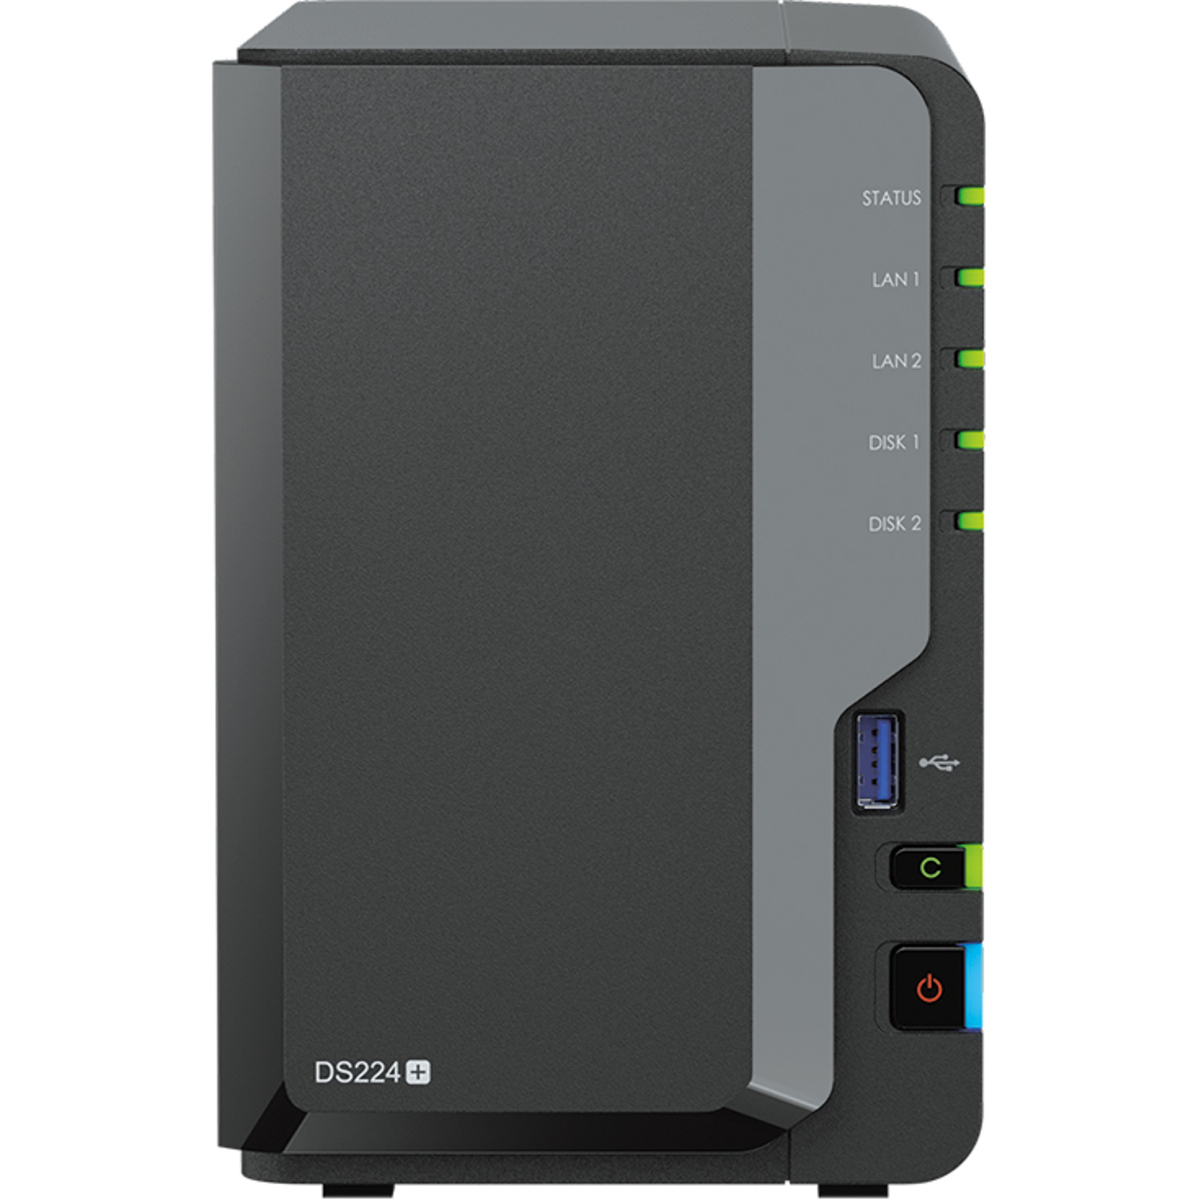 Synology DiskStation DS224+ 4tb 2-Bay Desktop Personal / Basic Home / Small Office NAS - Network Attached Storage Device 2x2tb Sandisk Ultra 3D SDSSDH3-2T00 2.5 560/520MB/s SATA 6Gb/s SSD CONSUMER Class Drives Installed - Burn-In Tested - ON SALE - FREE RAM UPGRADE DiskStation DS224+